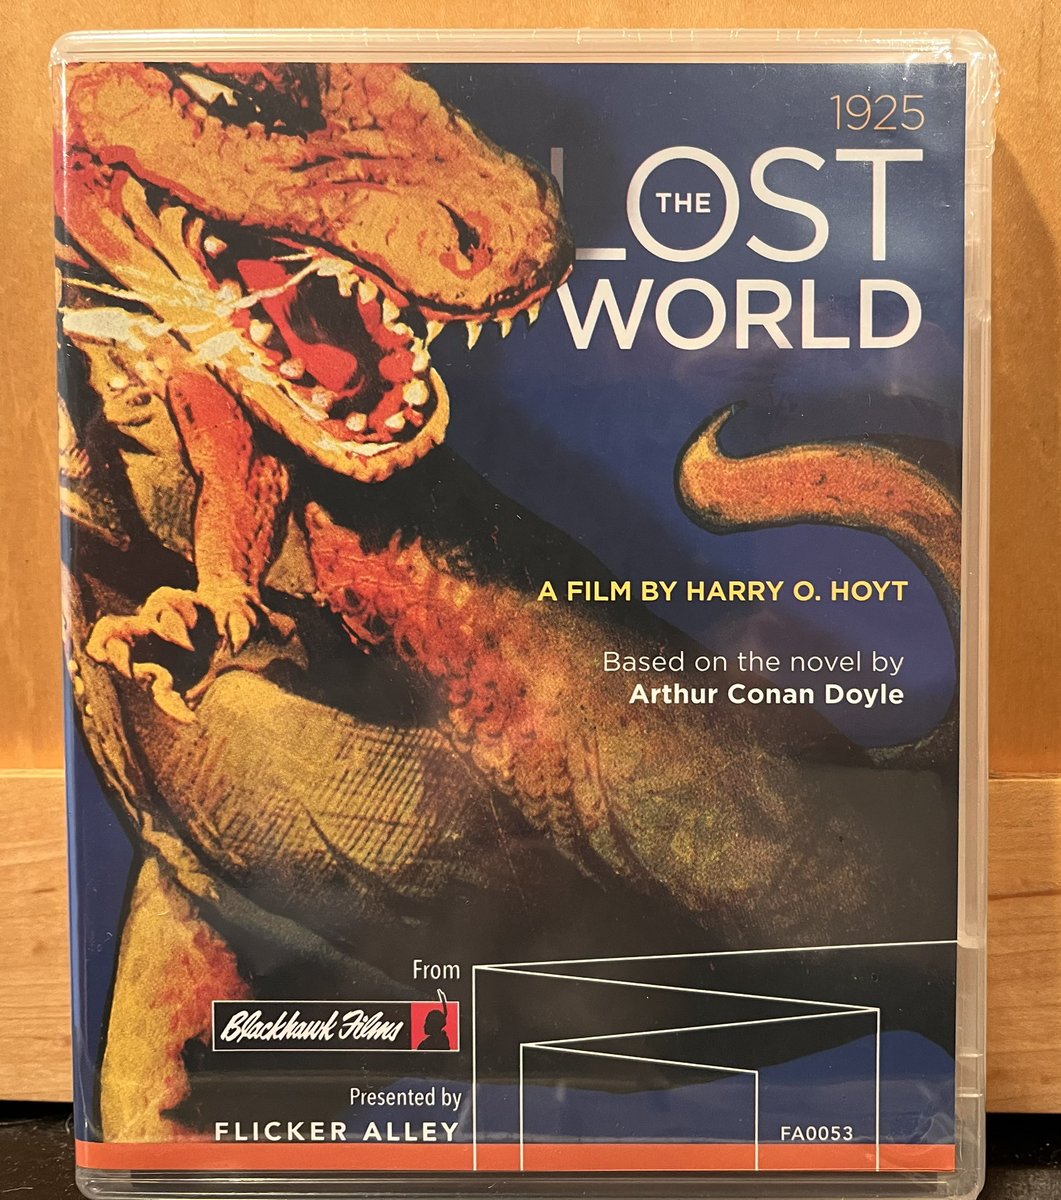 At long last, I finally add the original 1925 classic, The Lost World to the blu ray collection.  In addition it comes with the short film, The Ghost of Slumber Mountain, which was T-Rex’s film debut. #thelostworld #dinosaur #dinosaurs #恐竜 #ロスト・ワールド